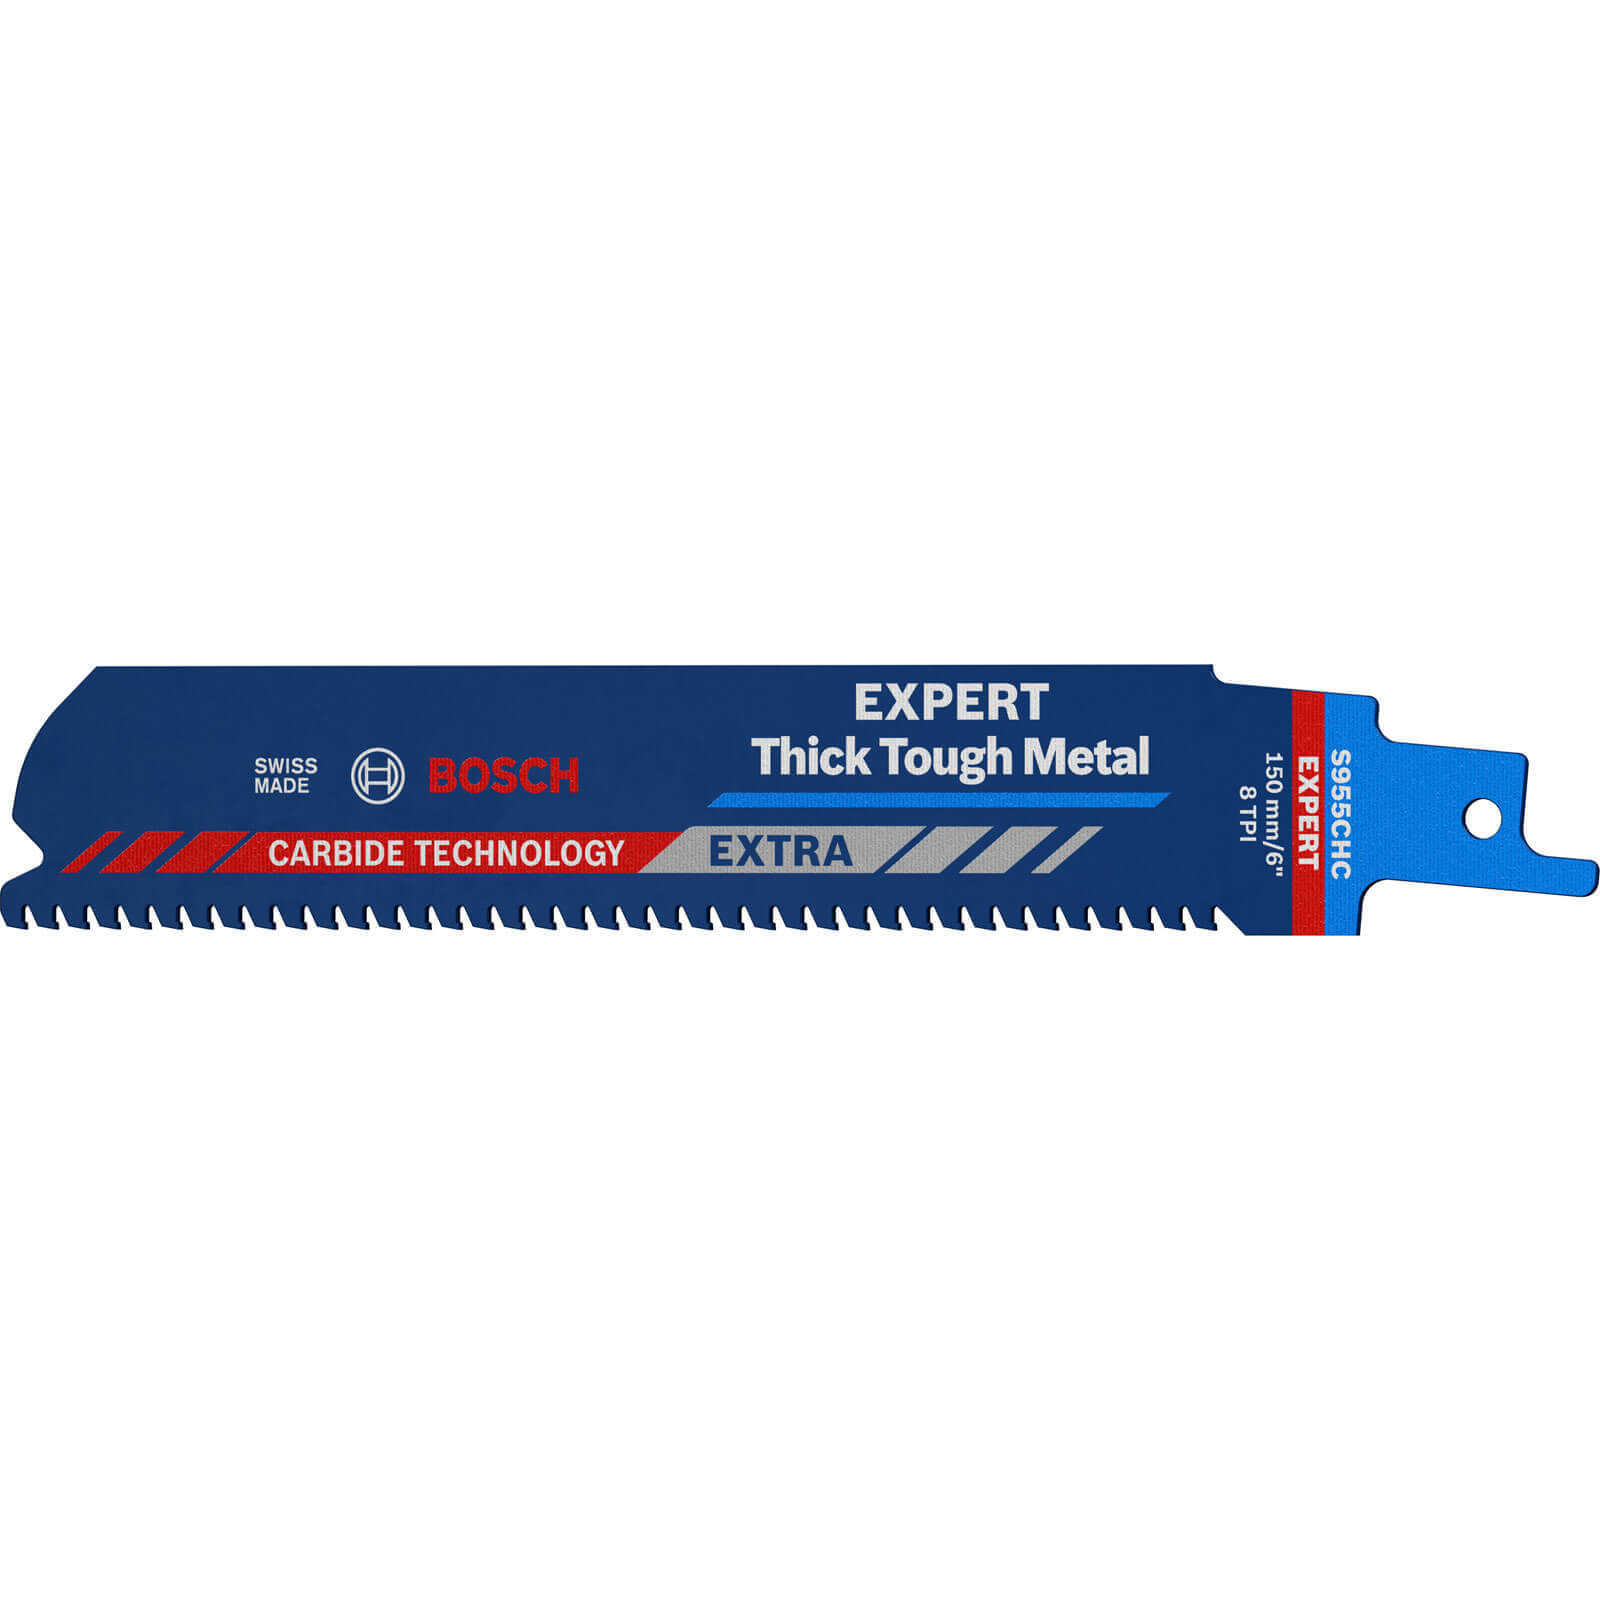 Bosch Expert S955CHC Thick Tough Metal Cutting Reciprocating Saw Blades 150mm Pack of 10